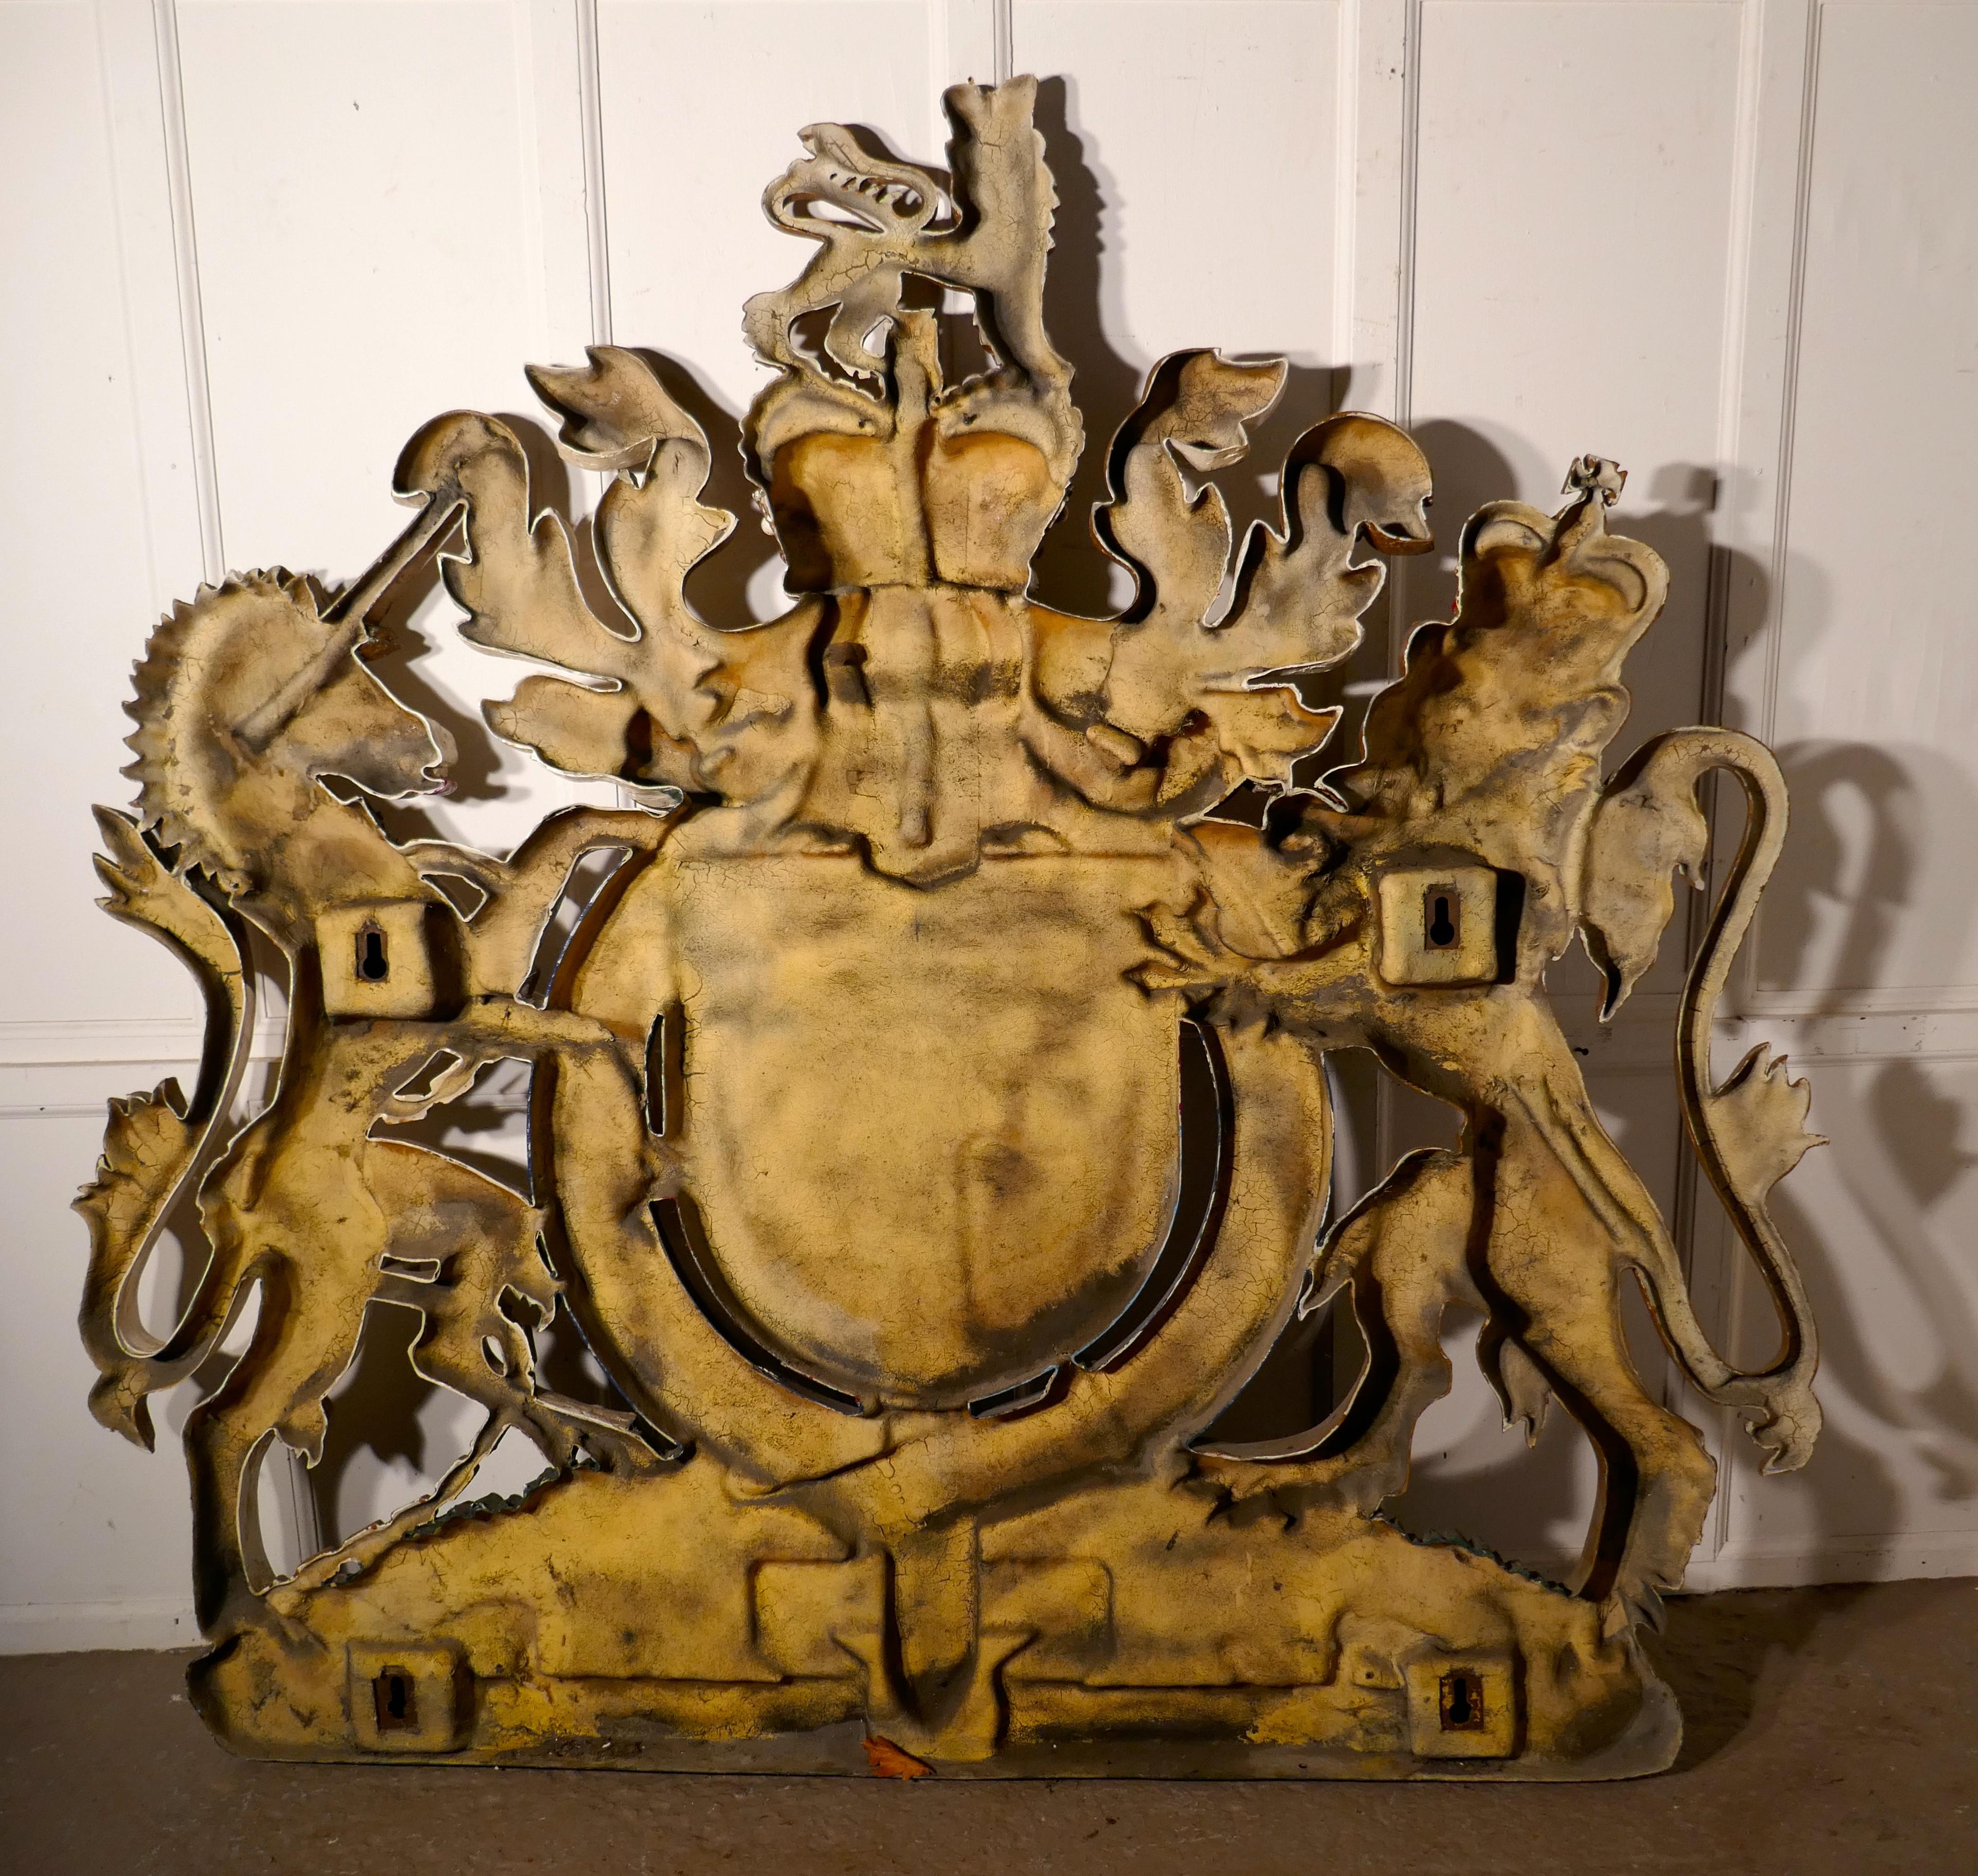 Huge British Royal Coat of Arms Wall Plaque 2